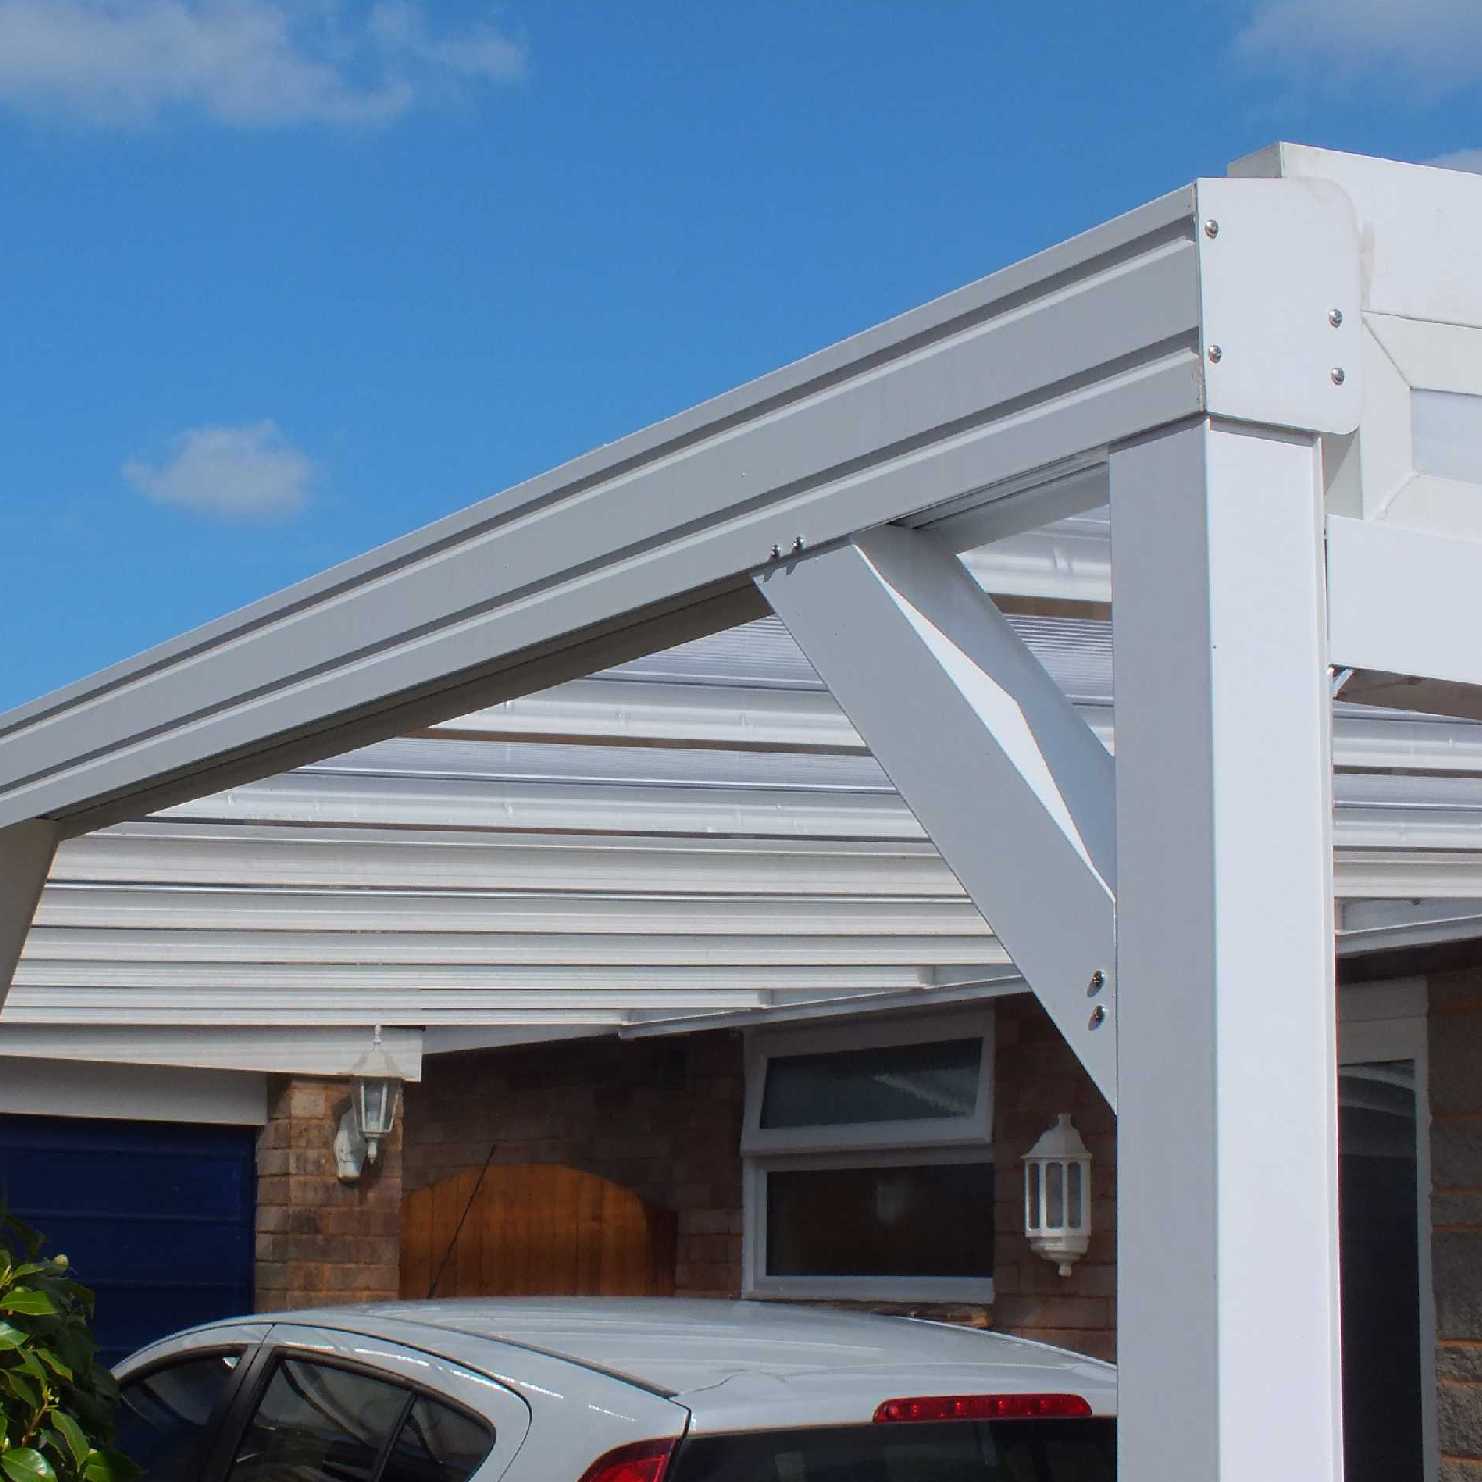 Great deals on Omega Smart Lean-To Canopy, White with 16mm Polycarbonate Glazing - 3.1m (W) x 2.5m (P), (2) Supporting Posts